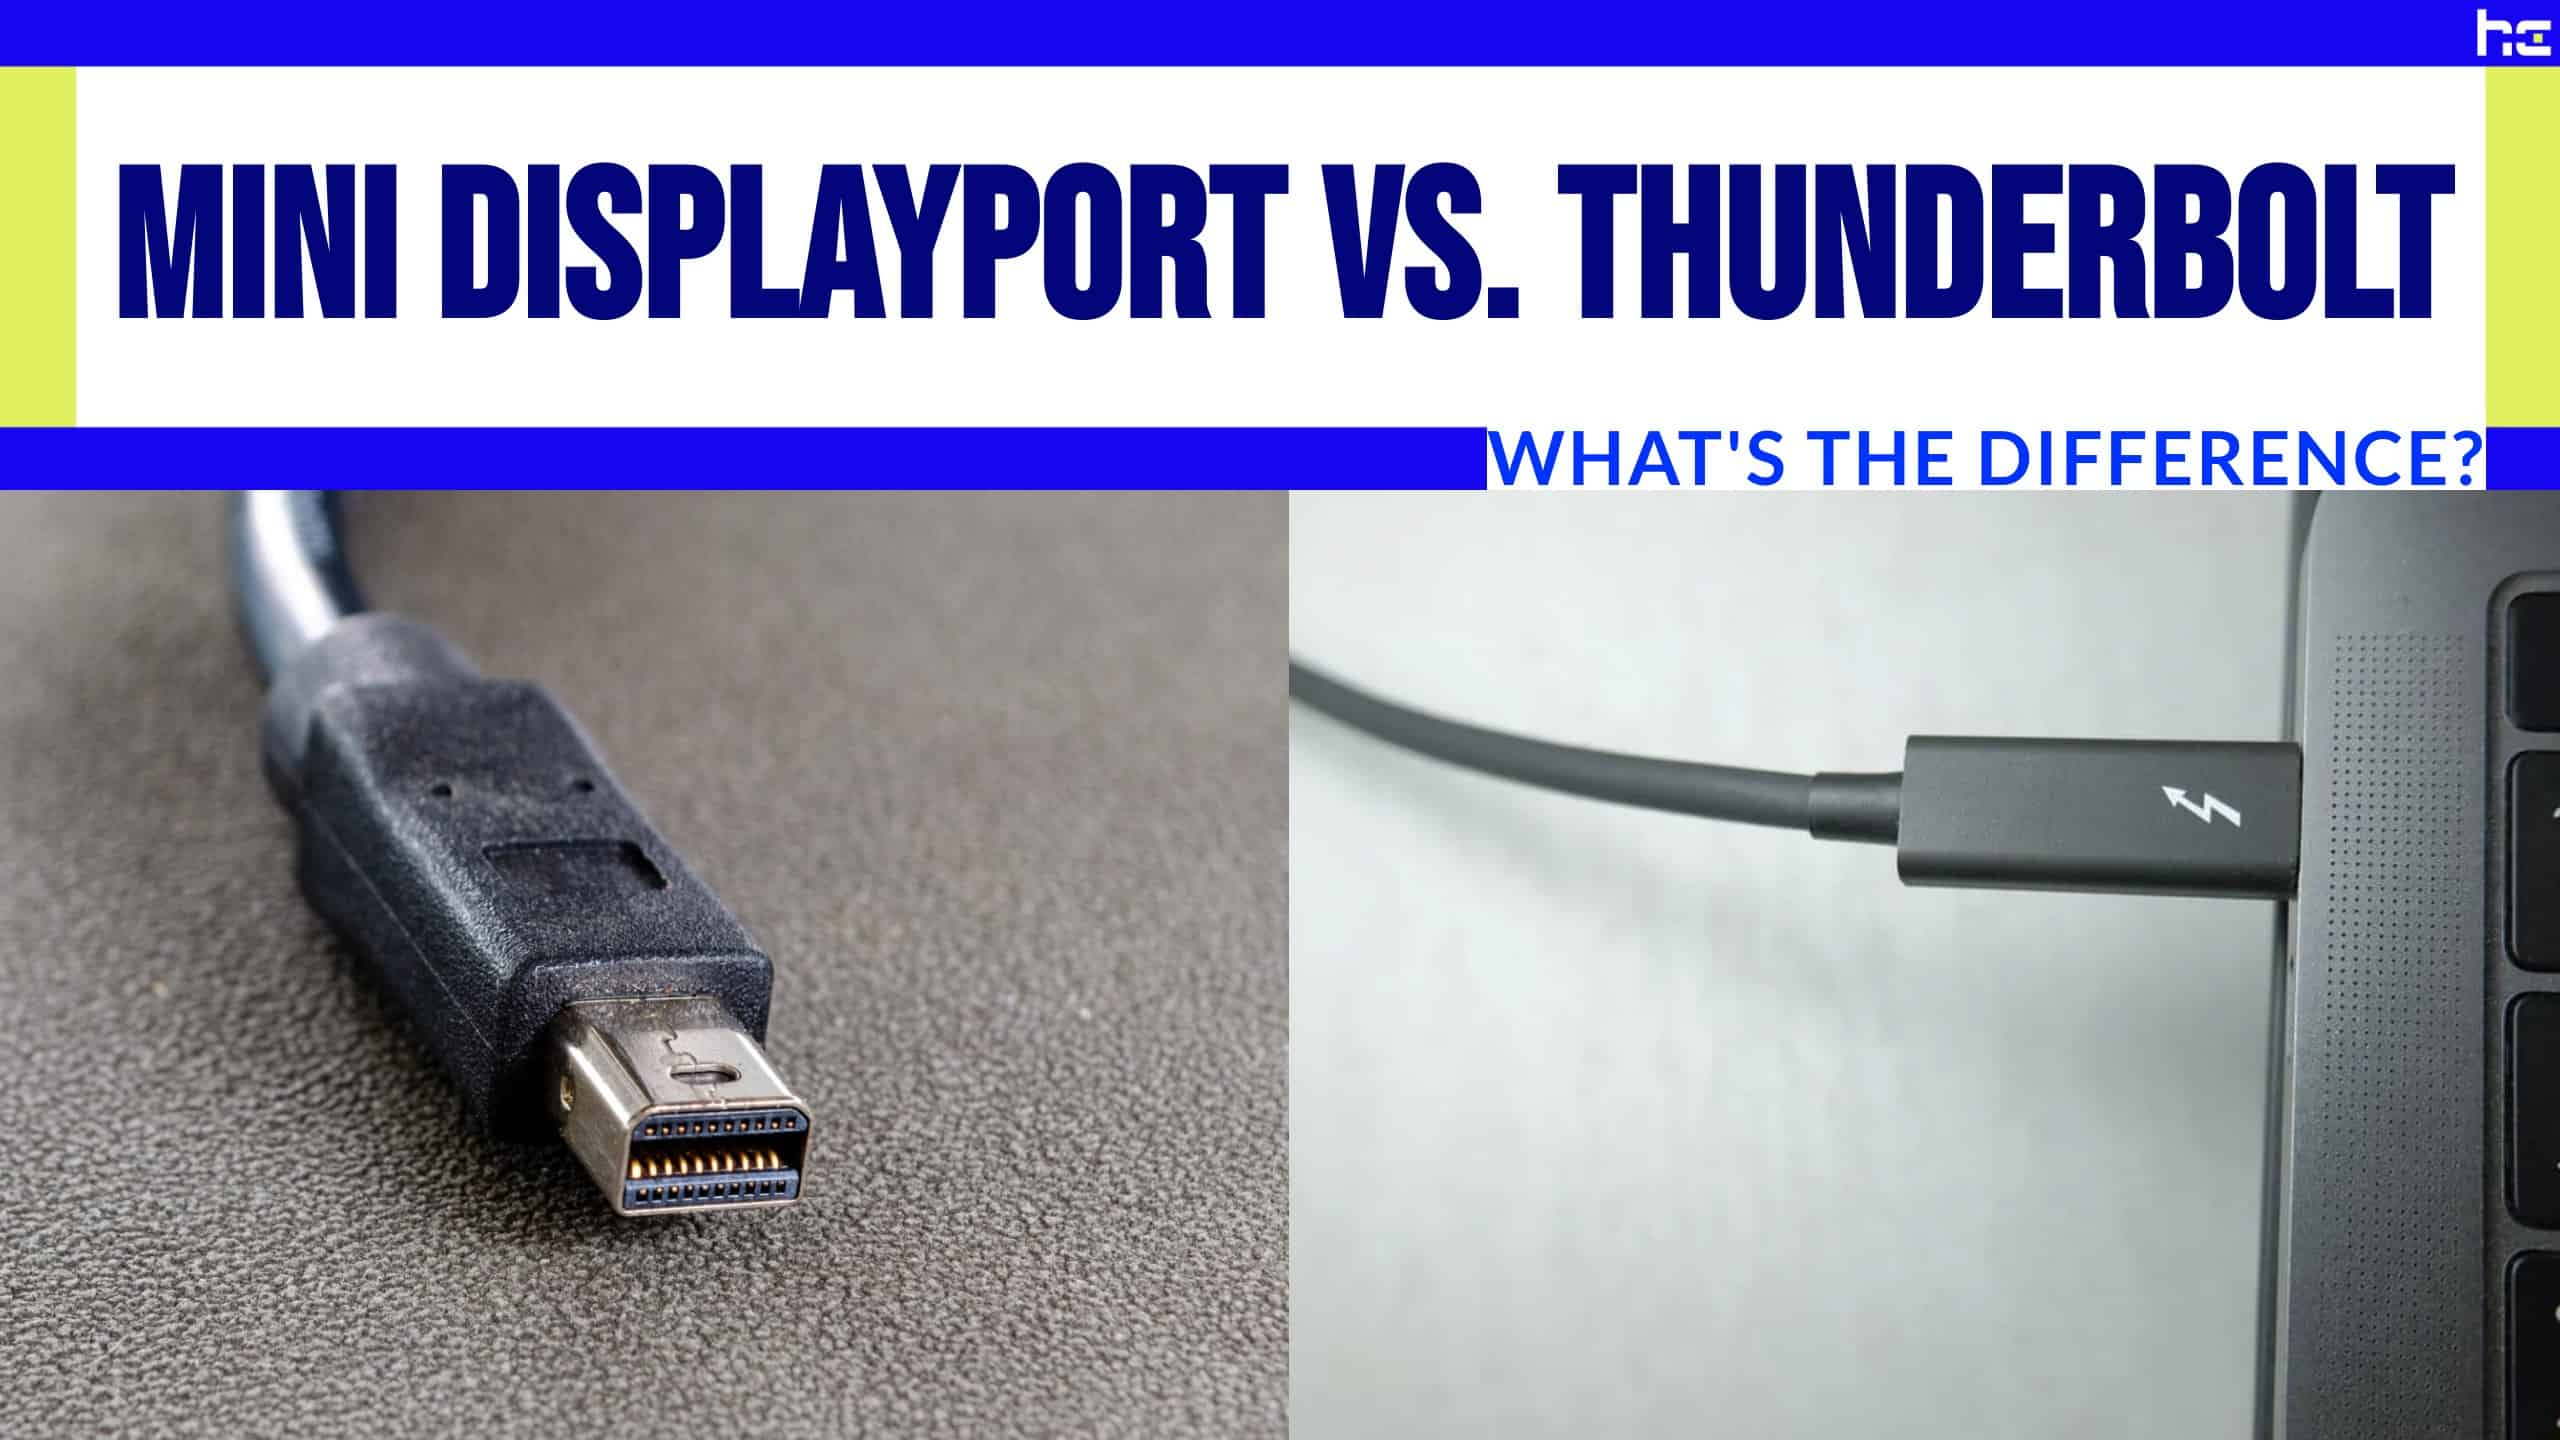 Thunderbolt 2 is NOT twice the speed of Thunderbolt 1